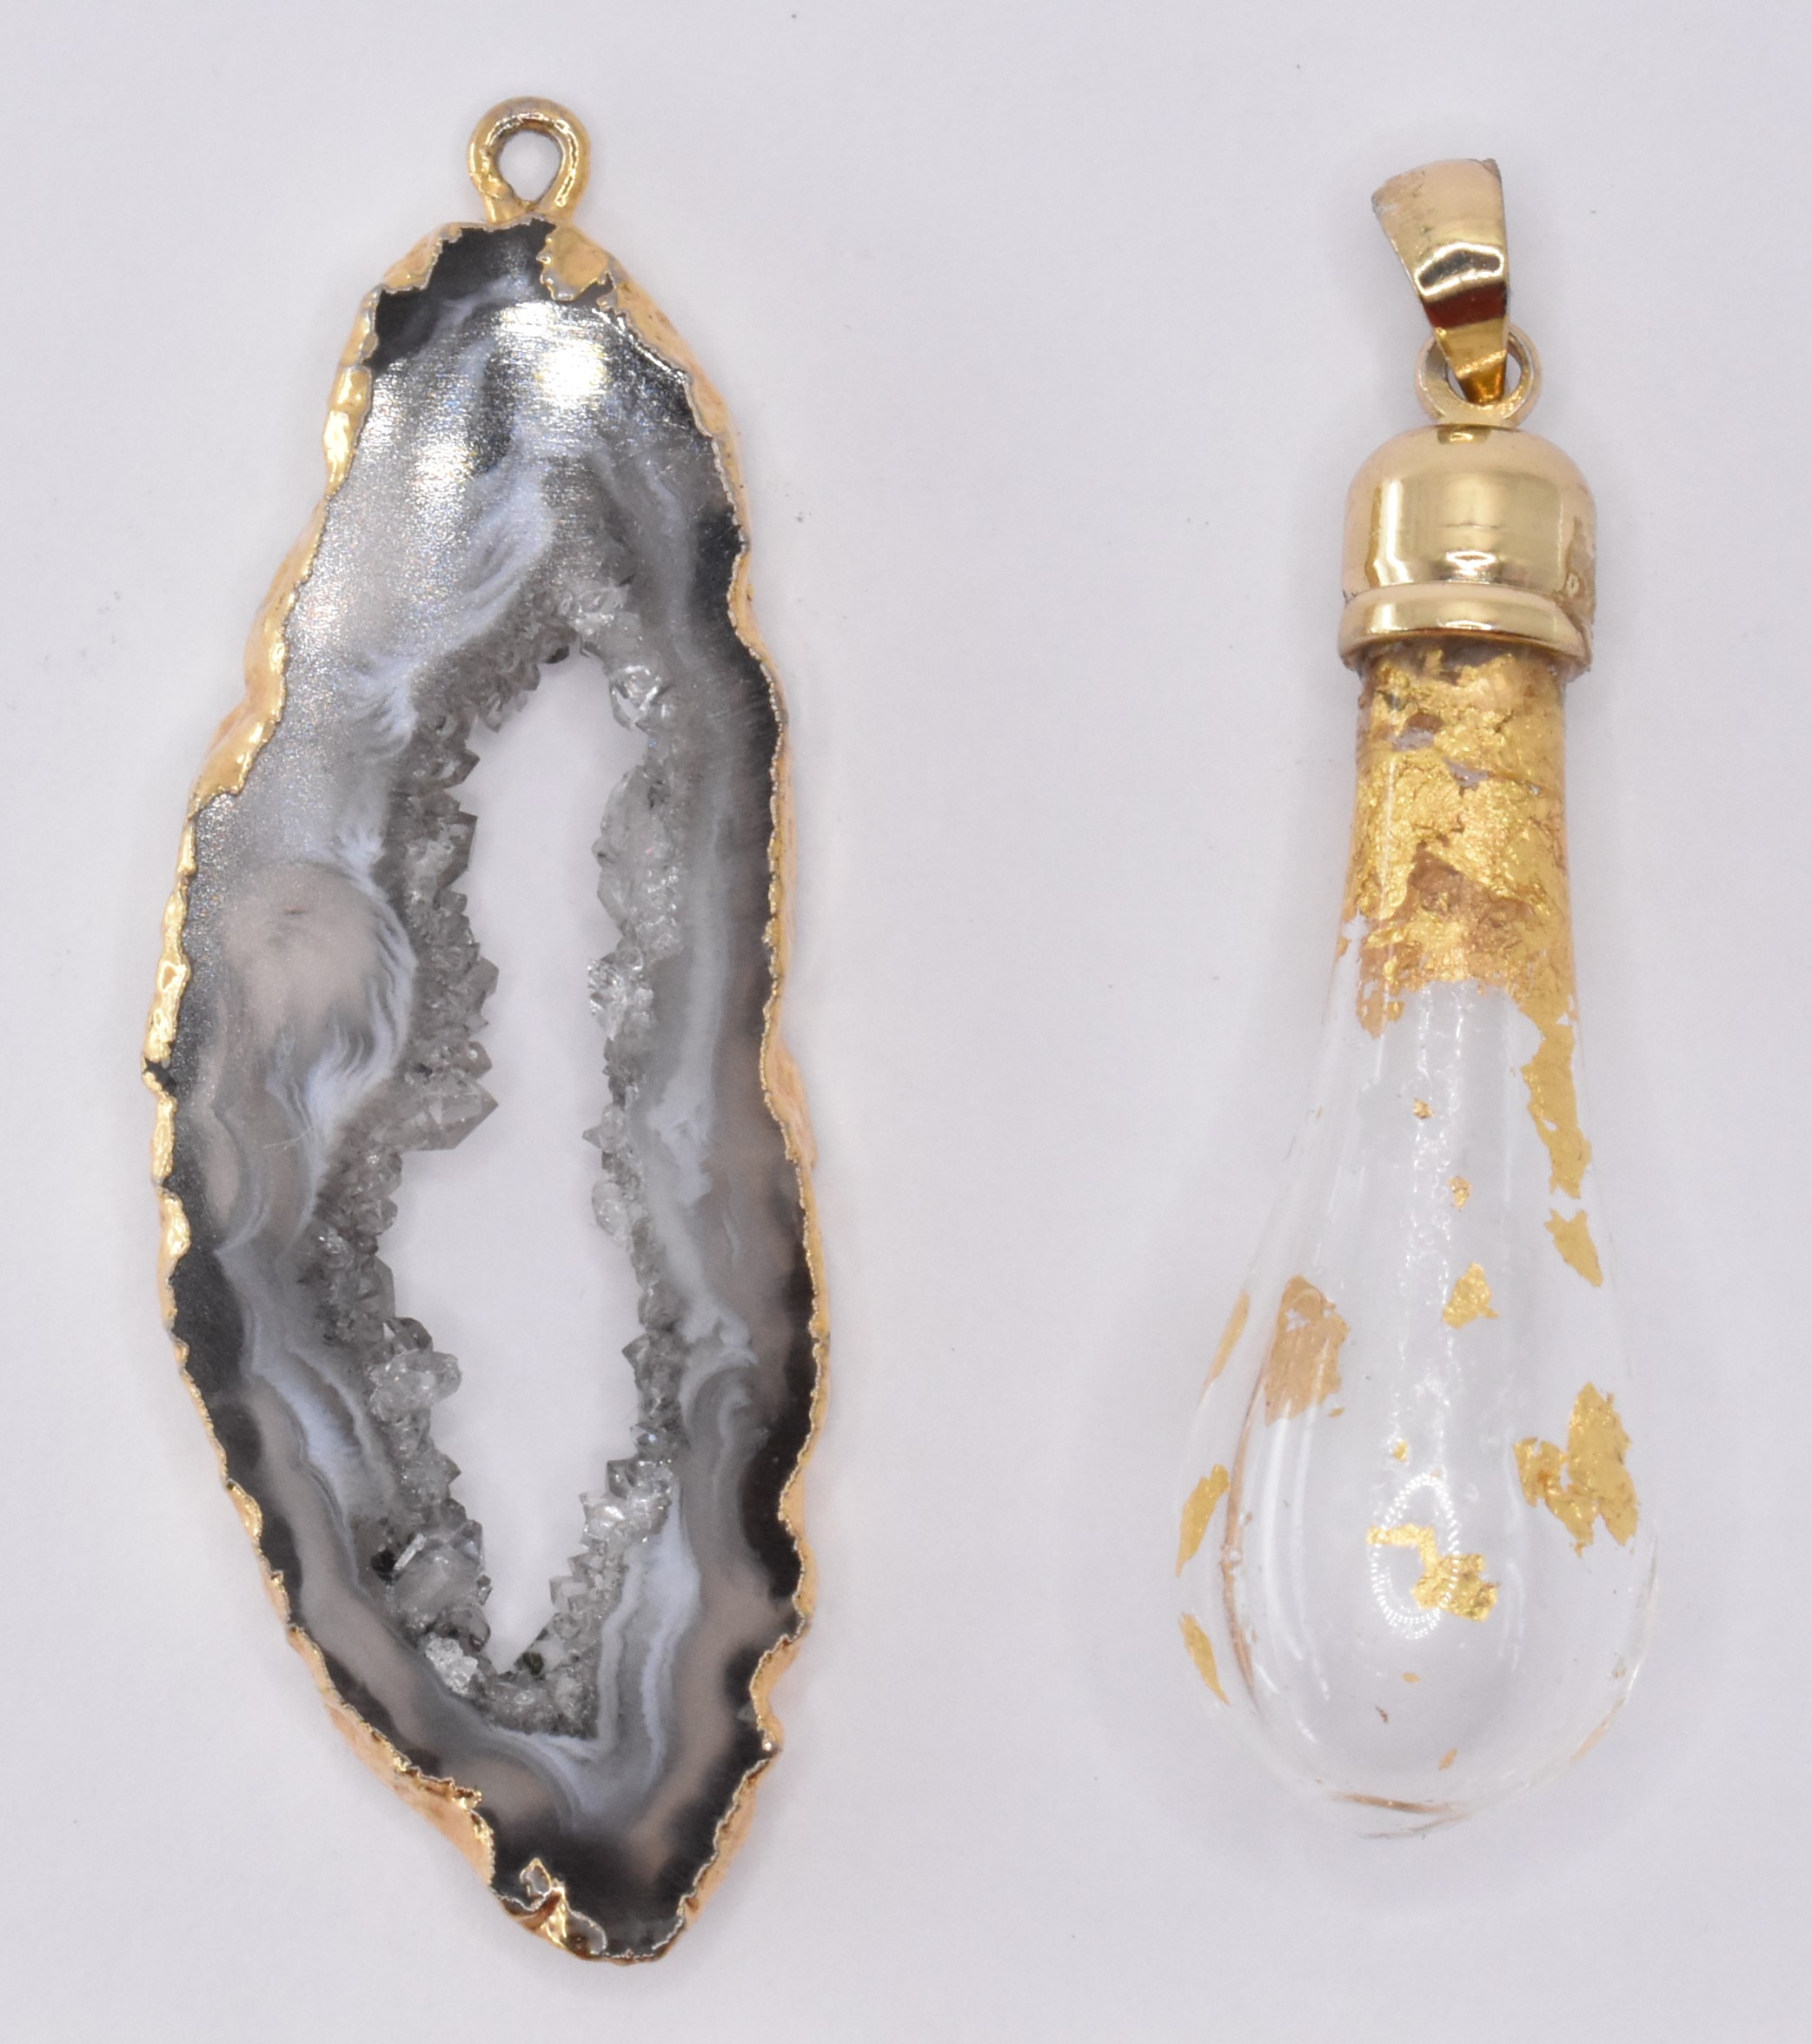 GEODE PENDANT WITH GLASS & GOLD LEAF BOTTLE PENDANT - Image 2 of 4